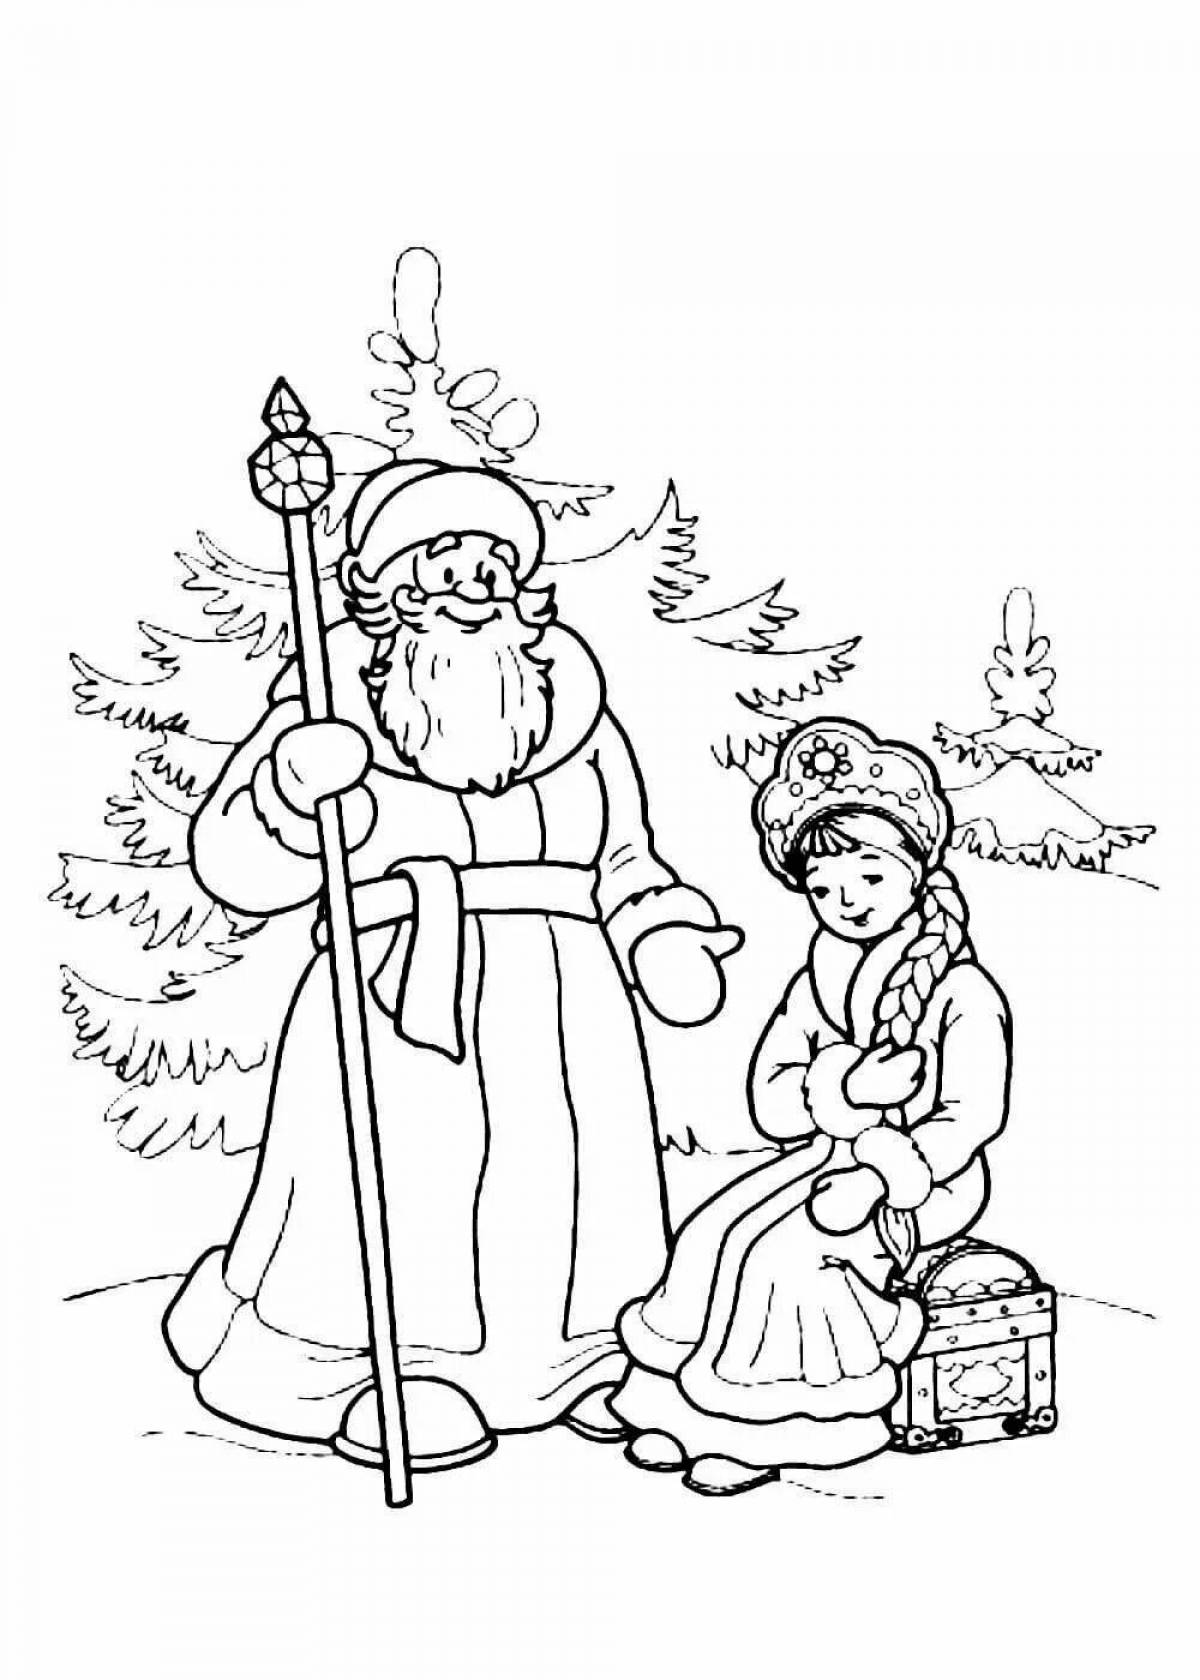 Coloring page glorious frost ivanovich